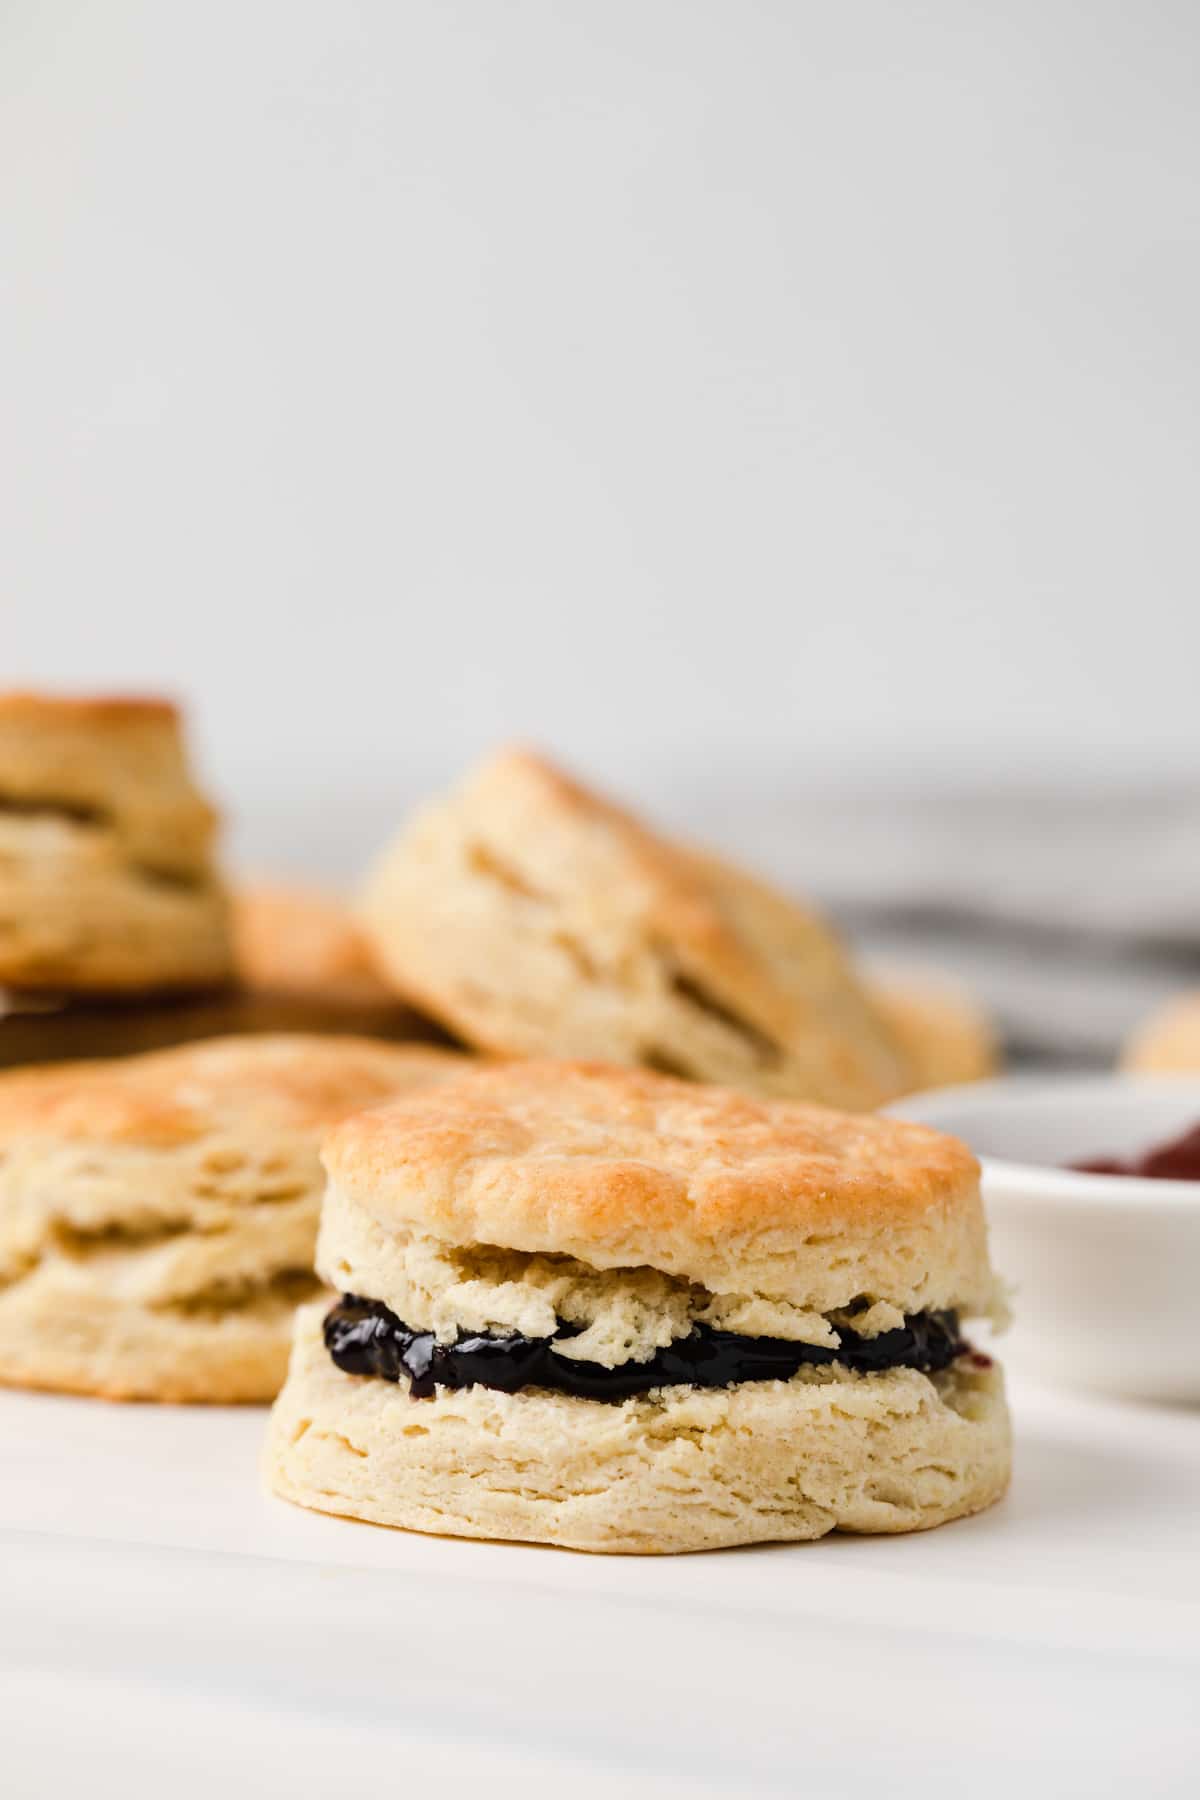 biscuit filled with jam